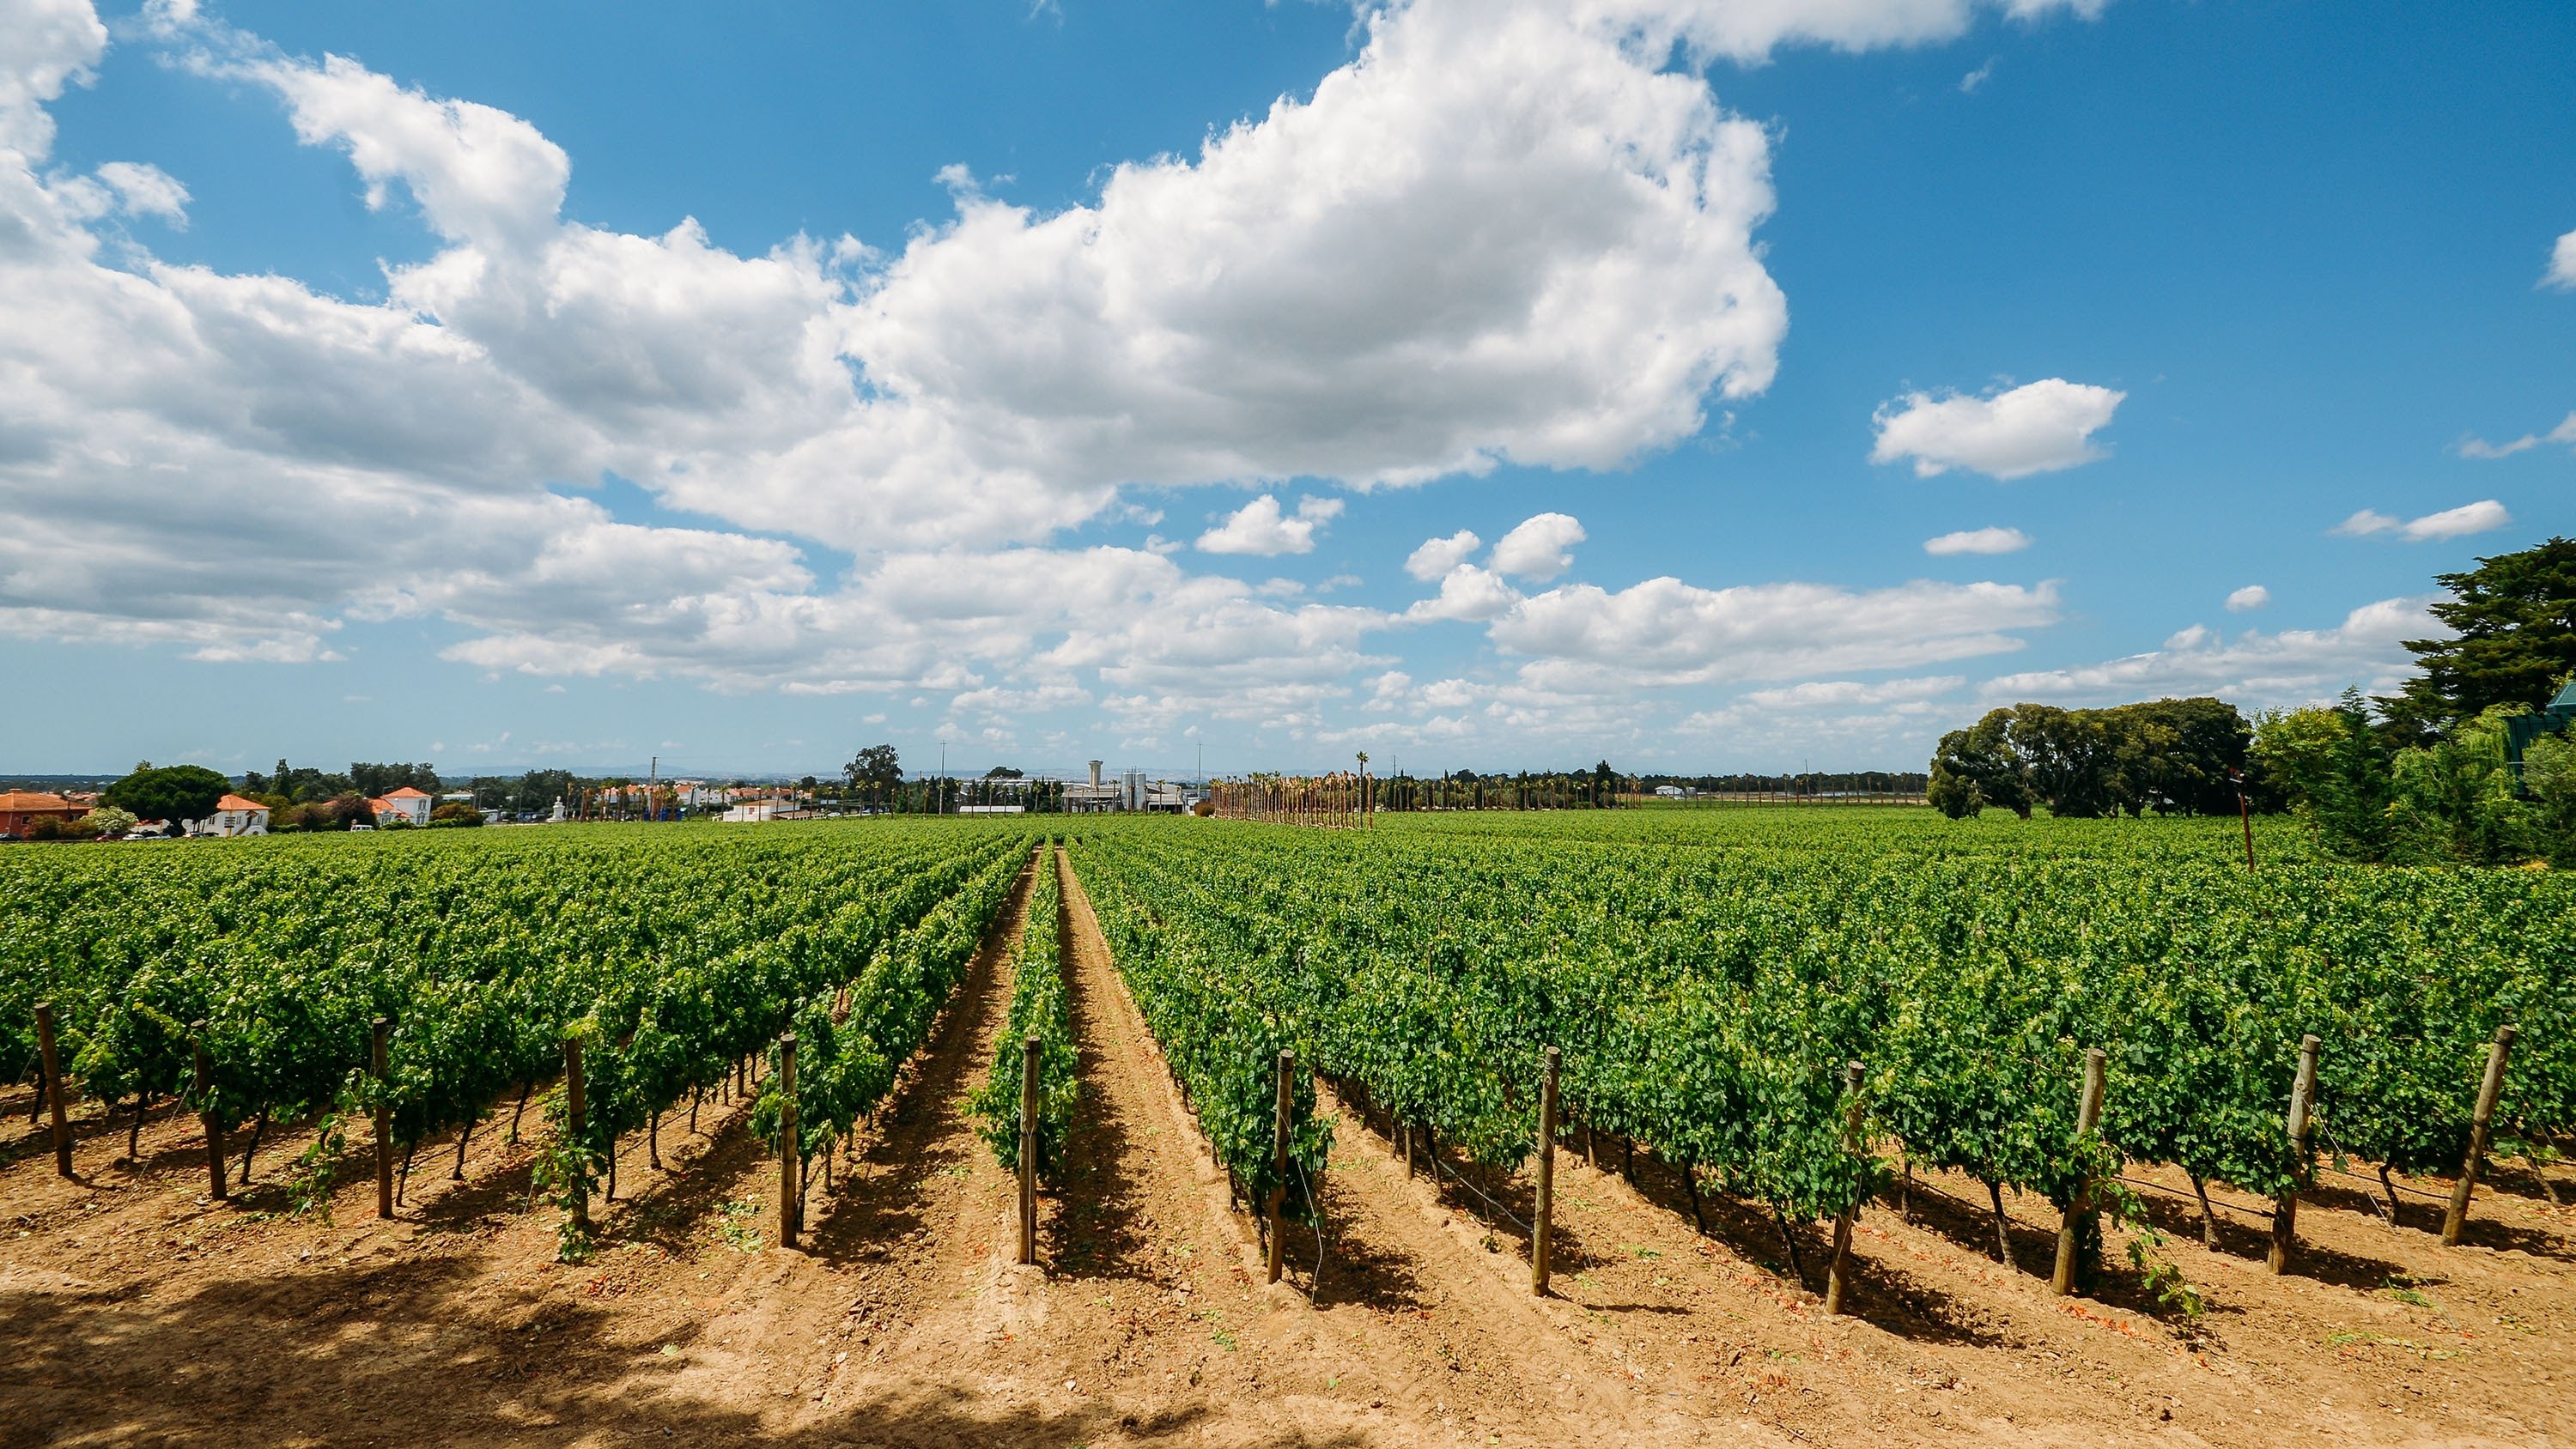 A vineyard at Azeitao can be seen in Setubal region, Portugal. (Shutterstock Photo)